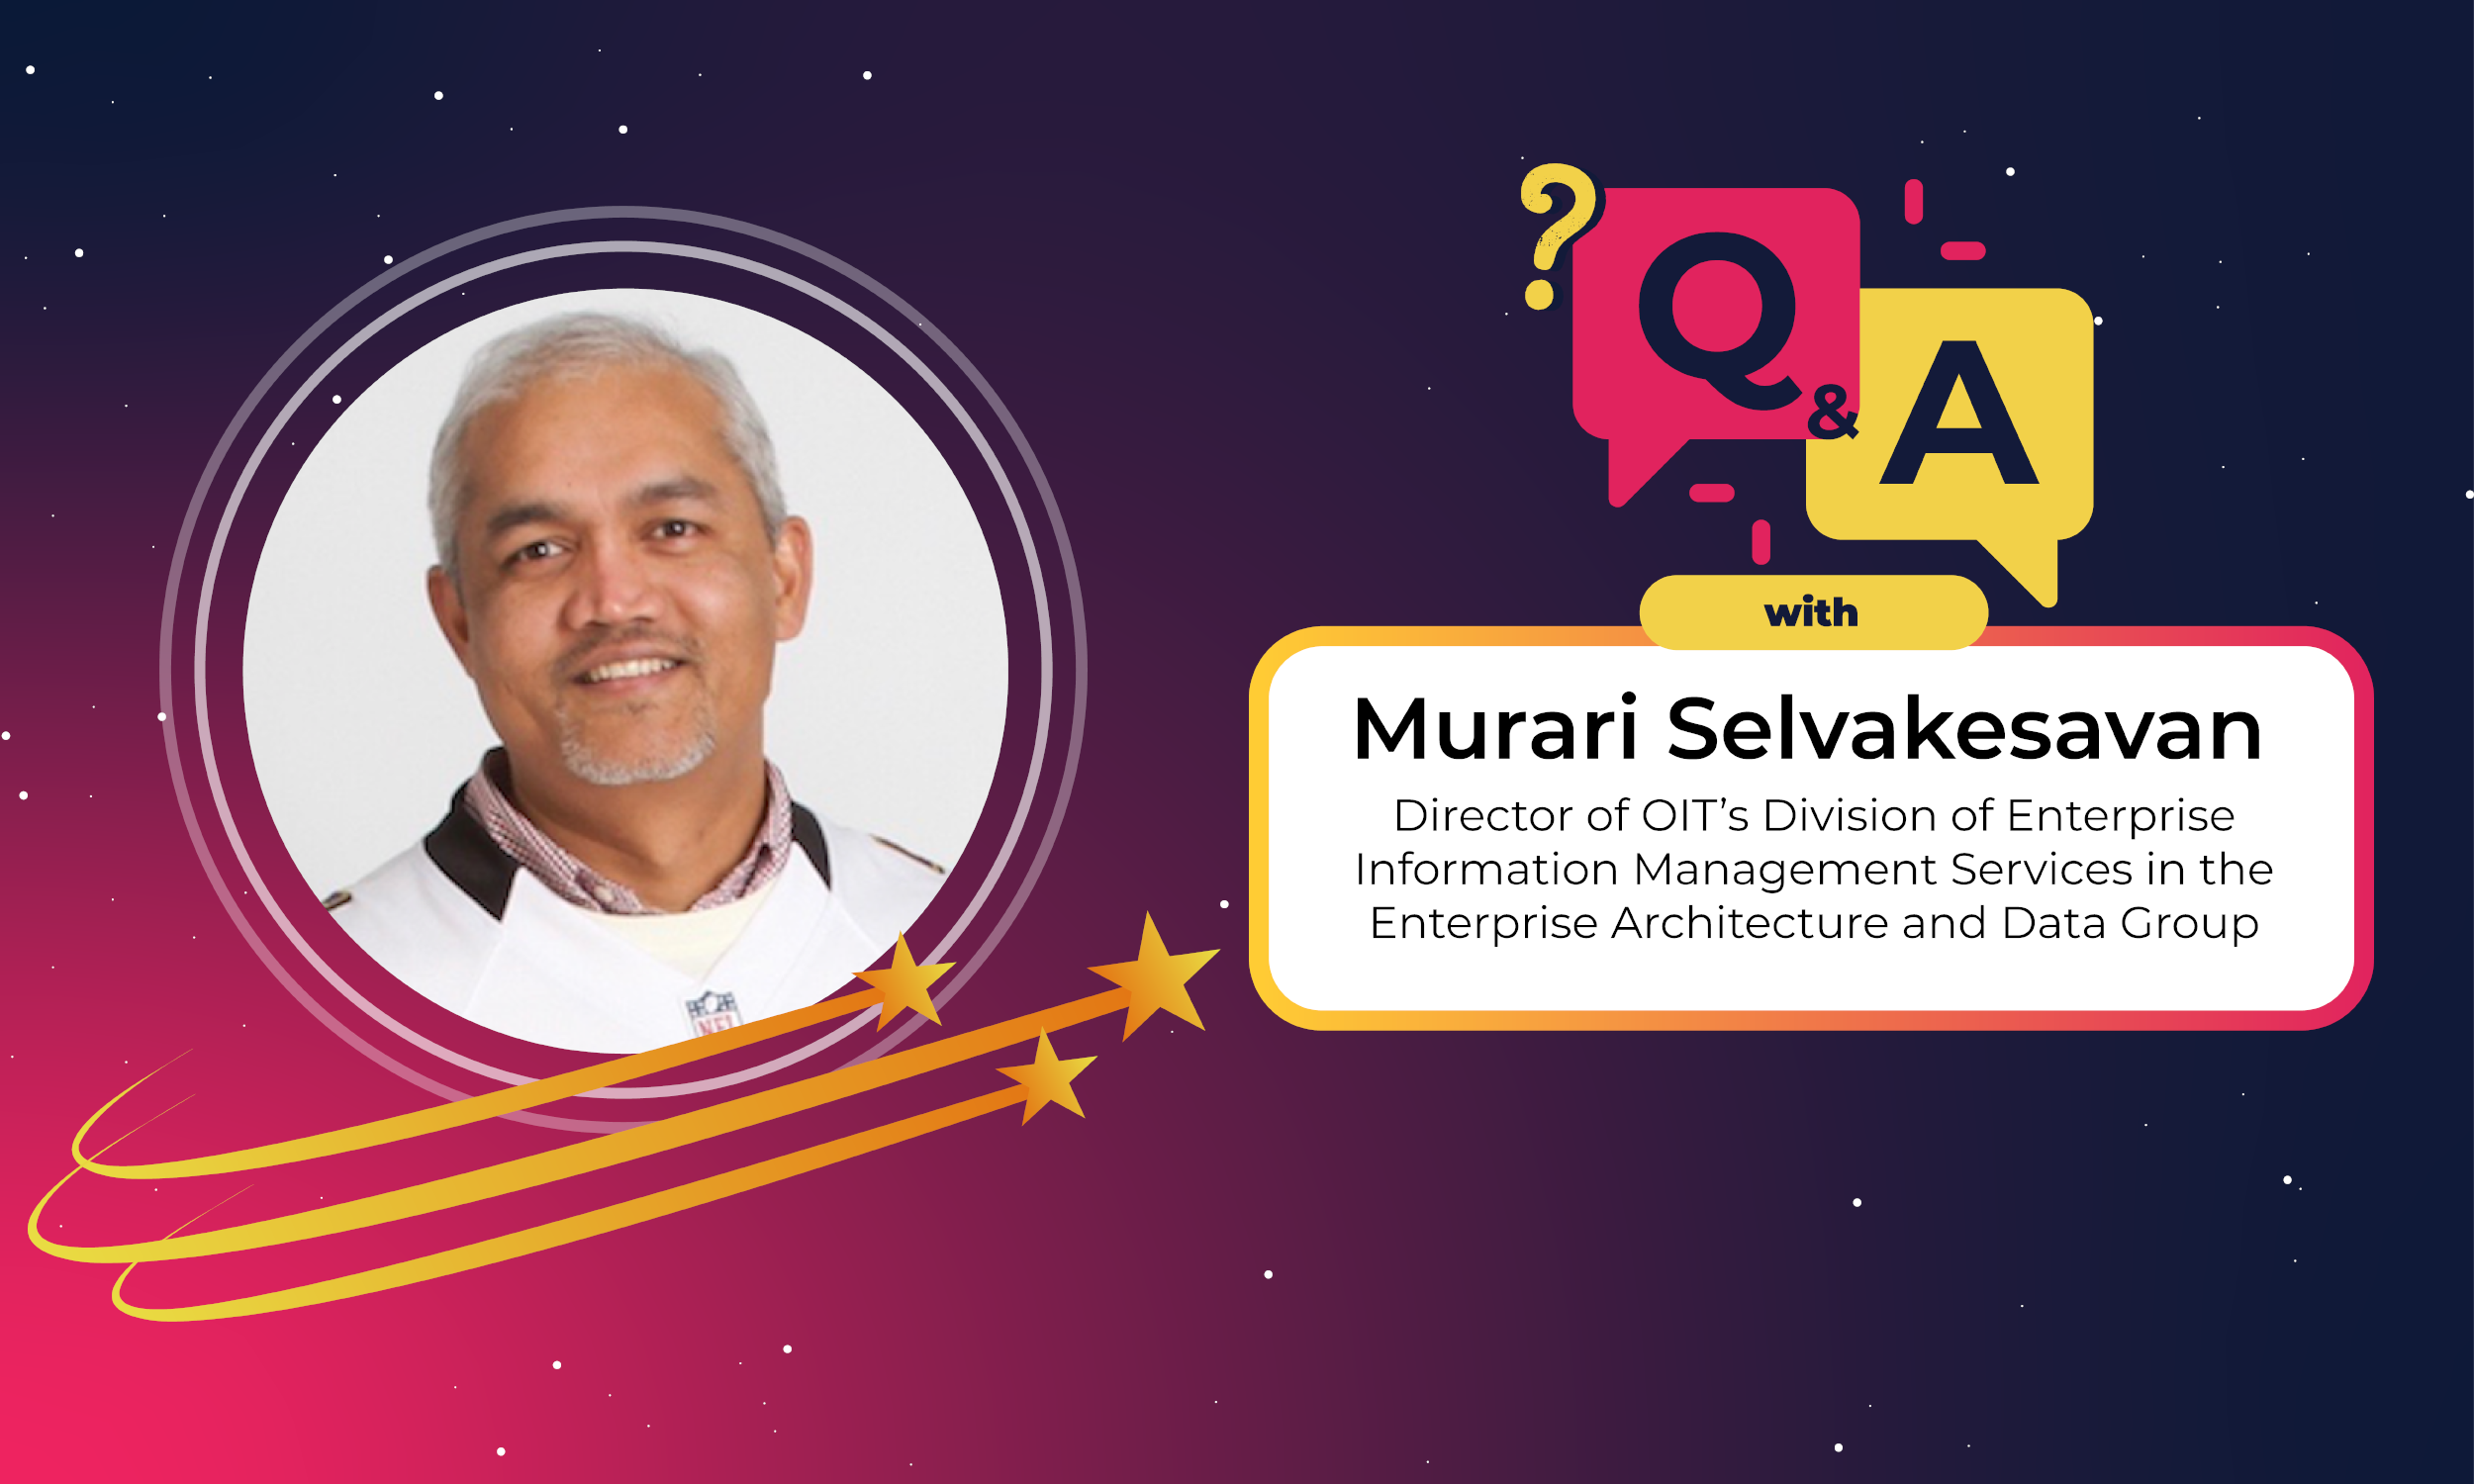 Q&A title card with photo of Murari Selvakesavan, Director of OIT's Division of Enterprise Information Management Services in the Enterprise Architecture and Data Group